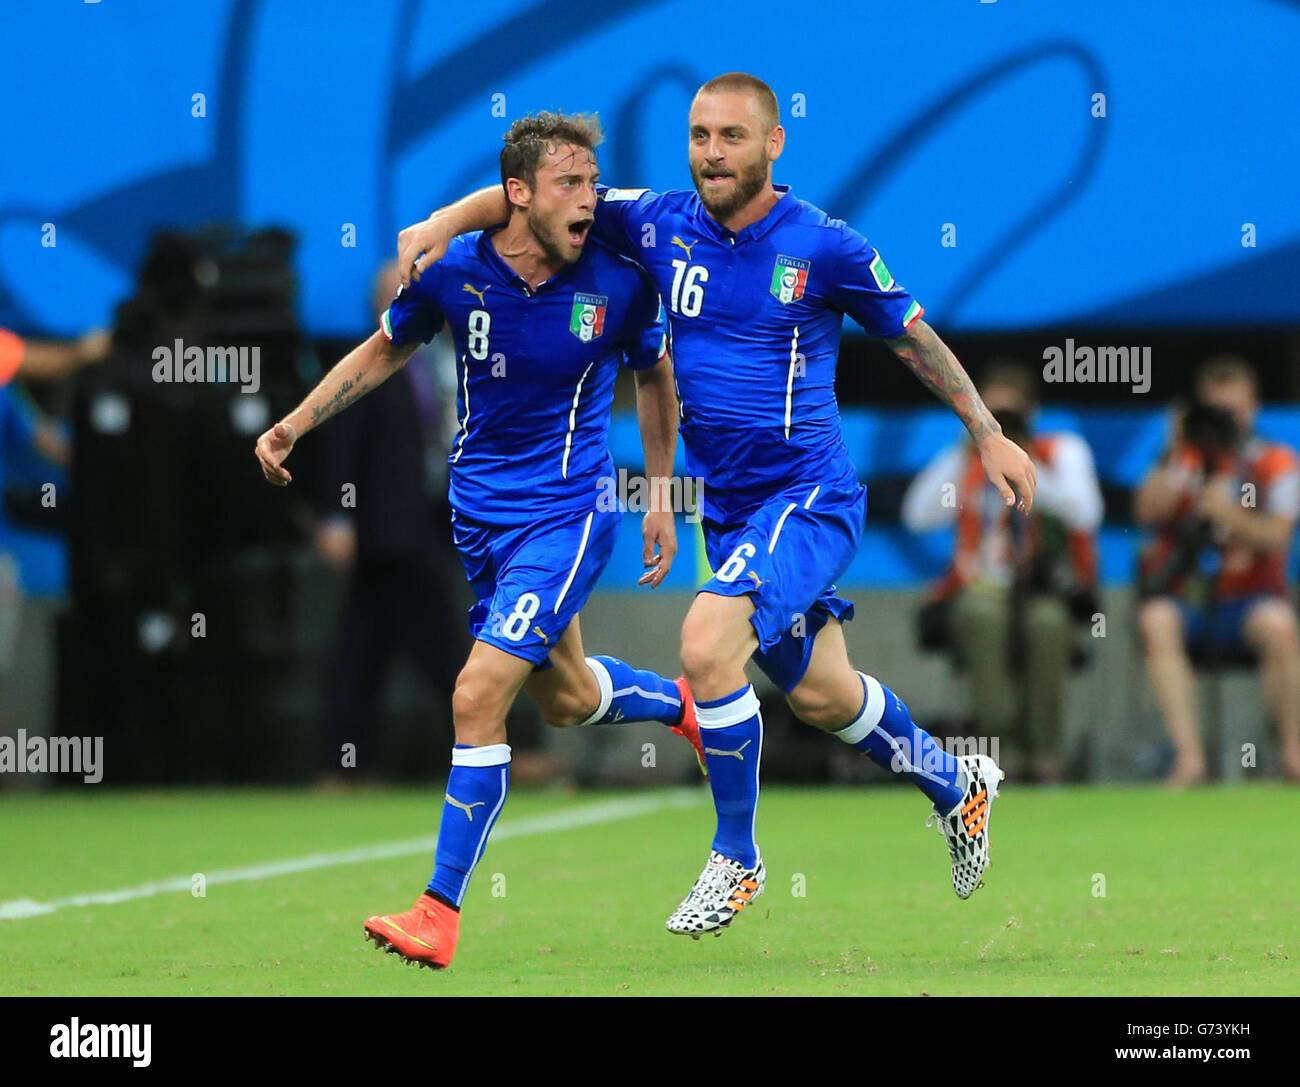 Italy's Claudio Marchisio (left) celebrates scoring his side's first goal of the game with teammate Daniele de Rossi during the FIFA World Cup, Group D match at the Arena da Amazonia, Manaus, Brazil. Stock Photo